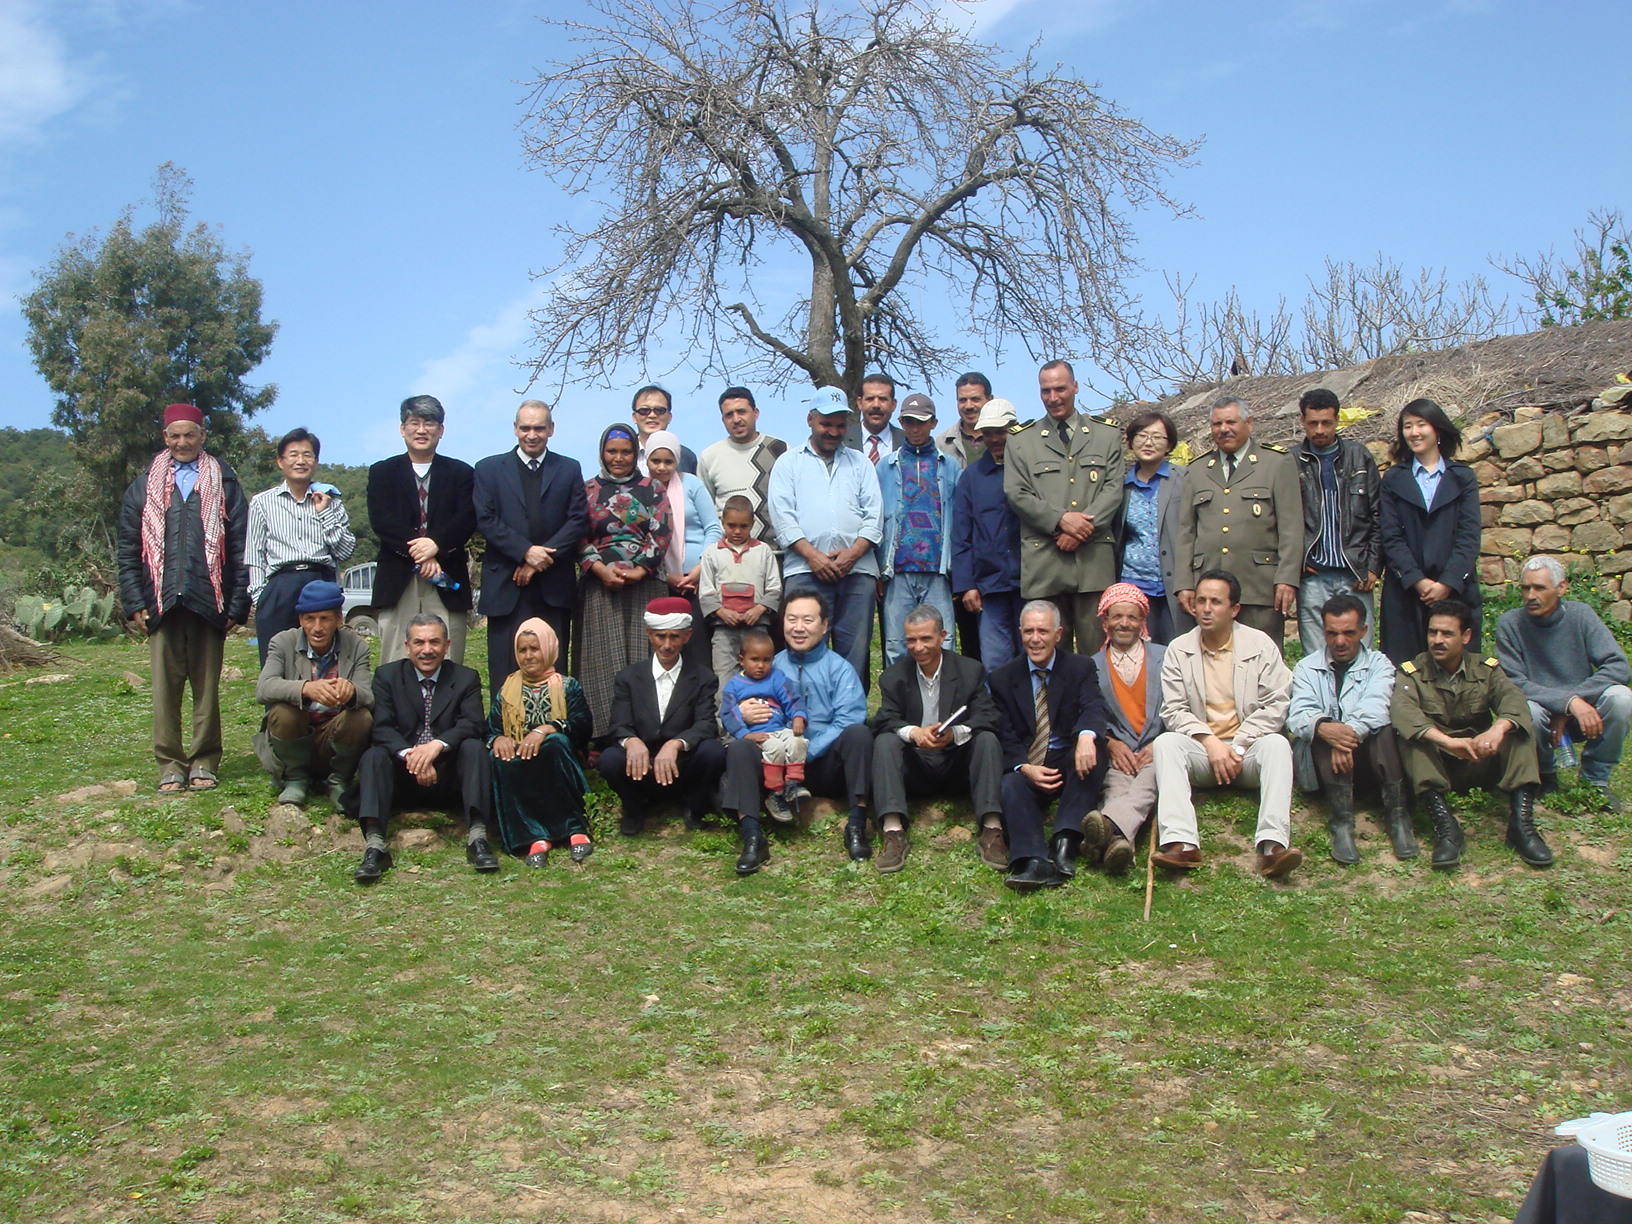 KFS launches forestry cooperation with Tunisia